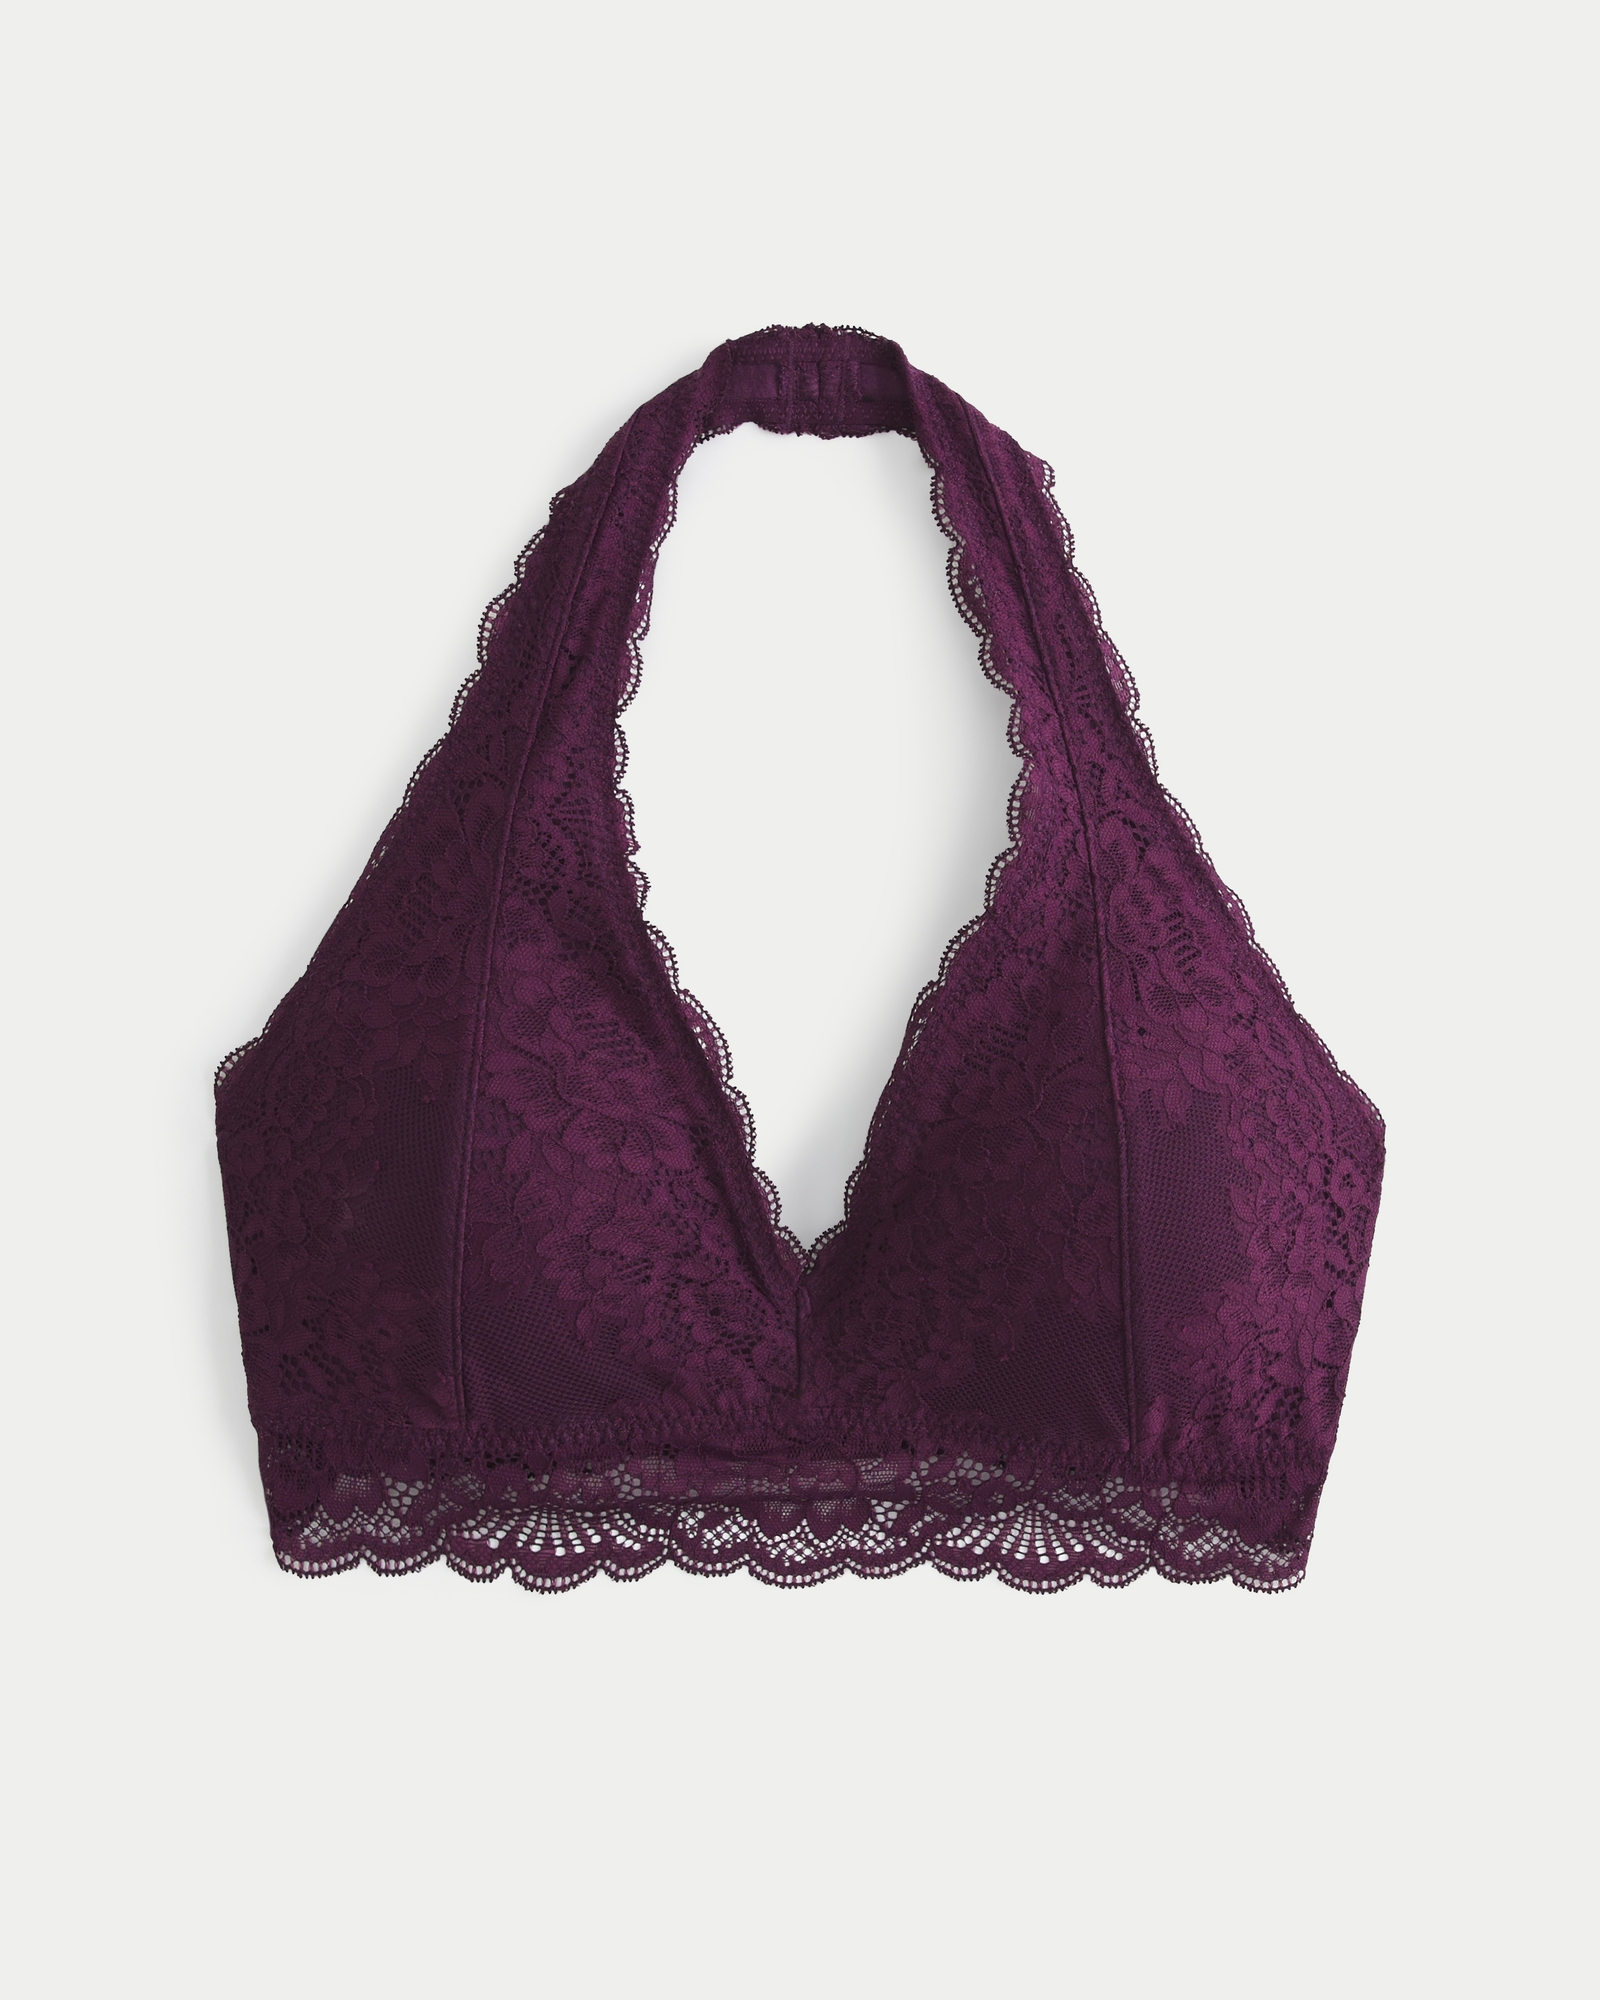 URBAN OUTFITTERS Lace Accent Halter TOP Bralette * S